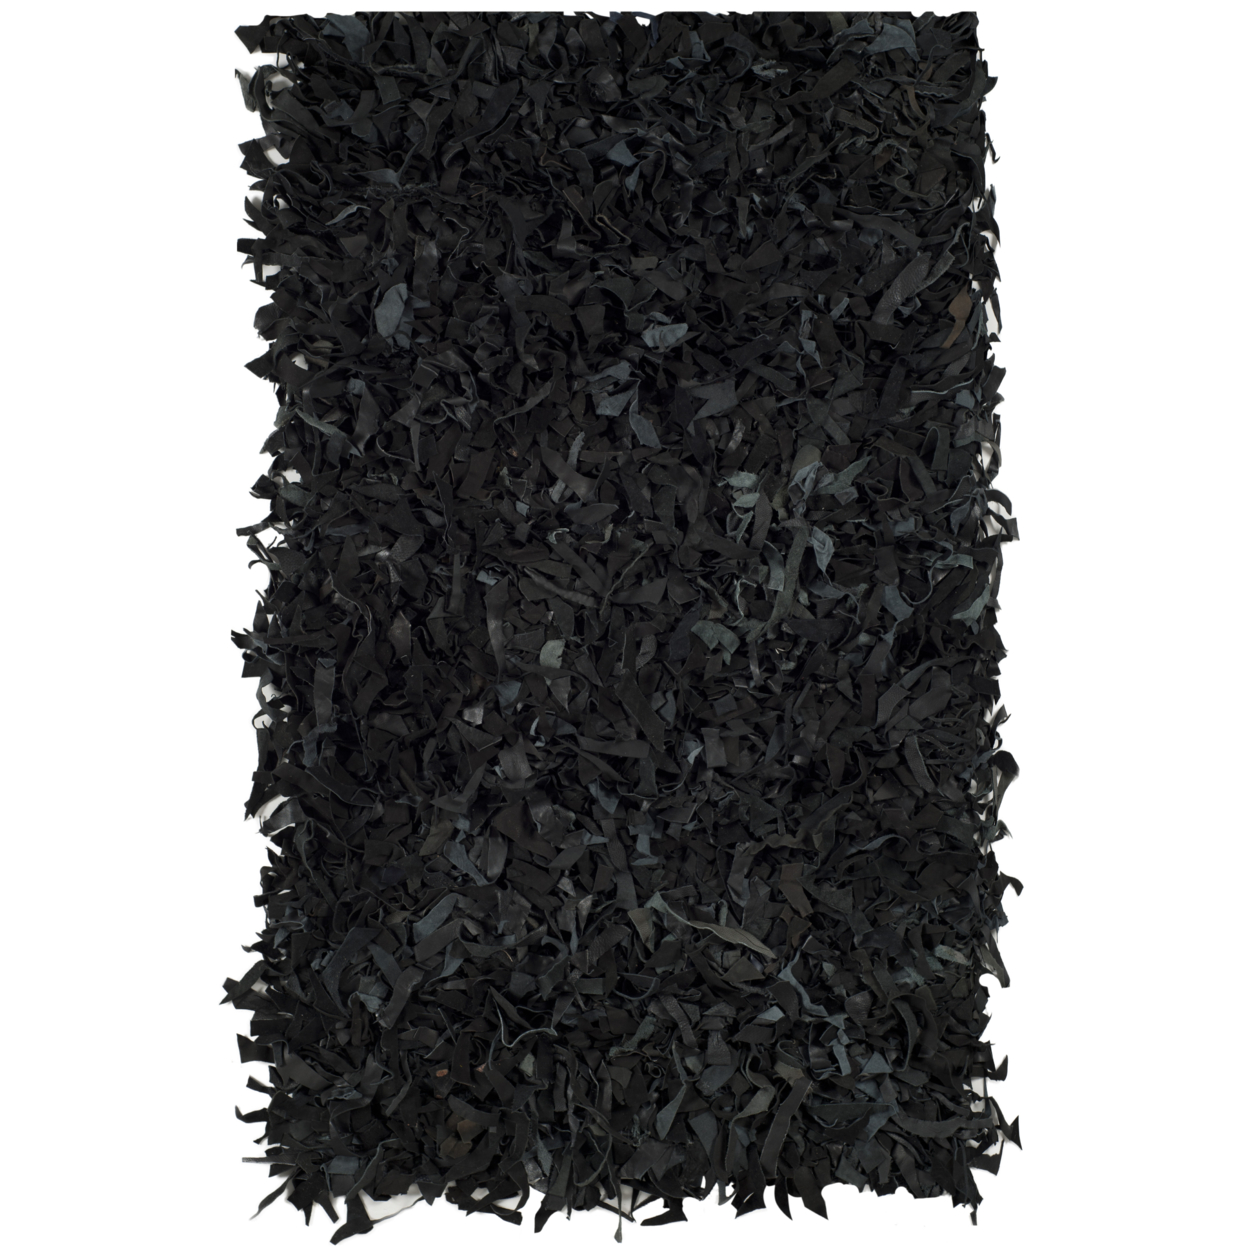 SAFAVIEH Leather Shag LSG511A Hand-knotted Black Rug - 8' Square